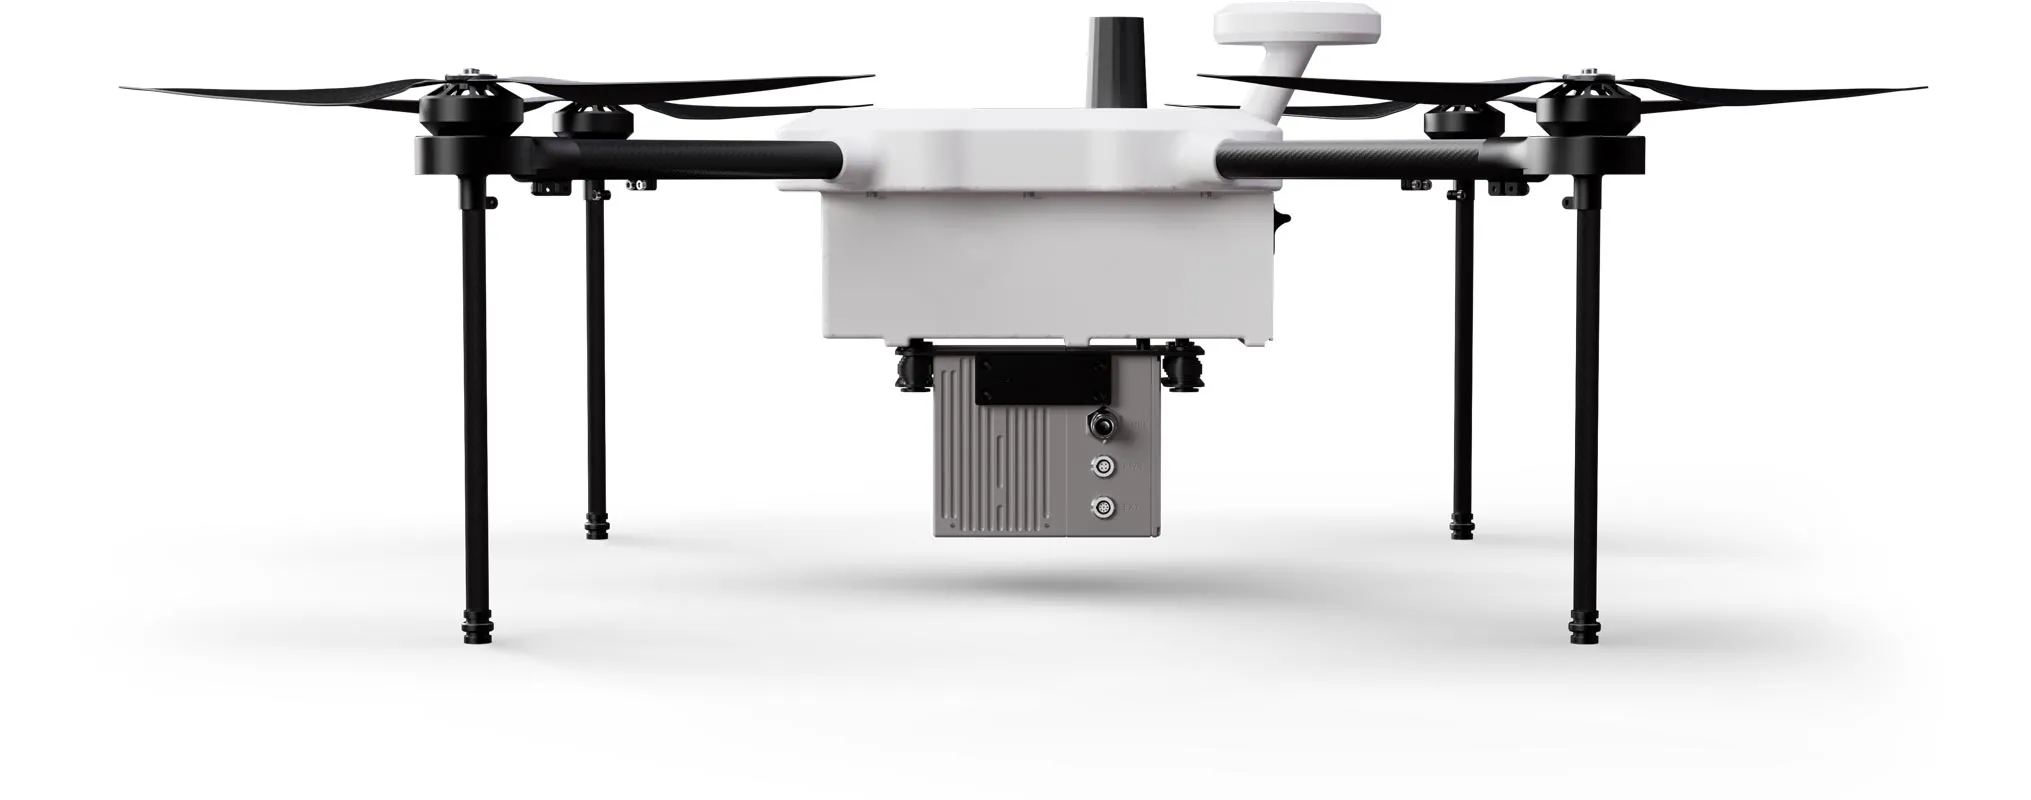 Exabotix Zelos LiDAR Industrial drone front view with LiDAR scanner for precise 3D scanning and surveying tasks.